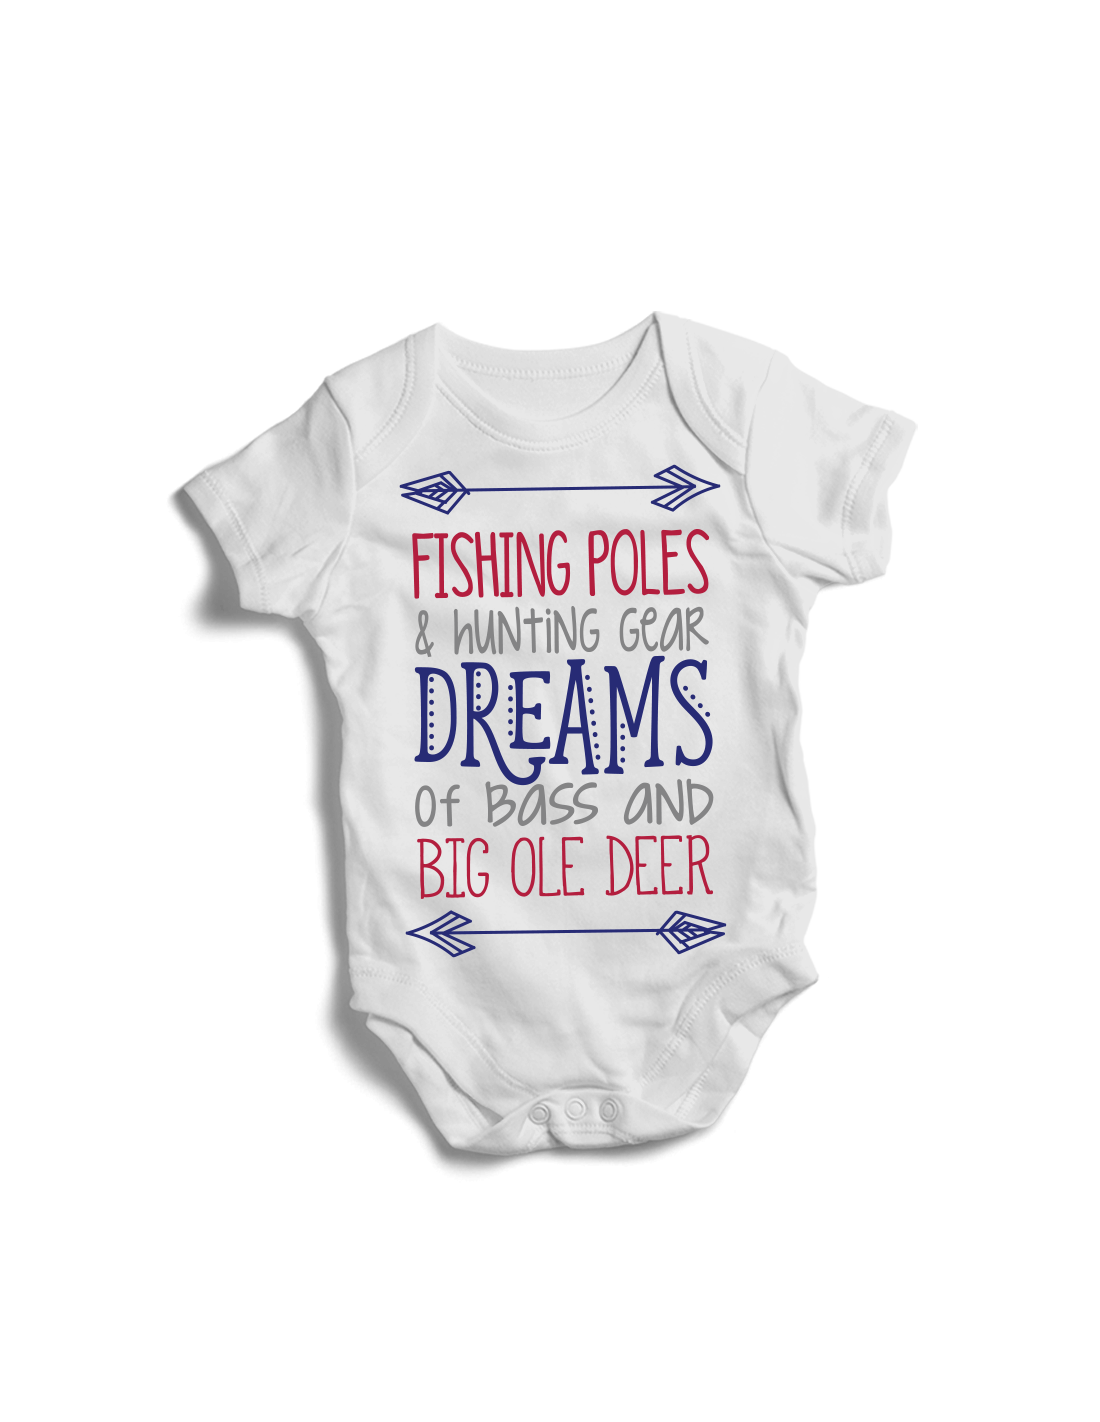 Fishing poles & hunting gear dreams Baby bodysuit store Size New Born  Sleeves Short Sleeve